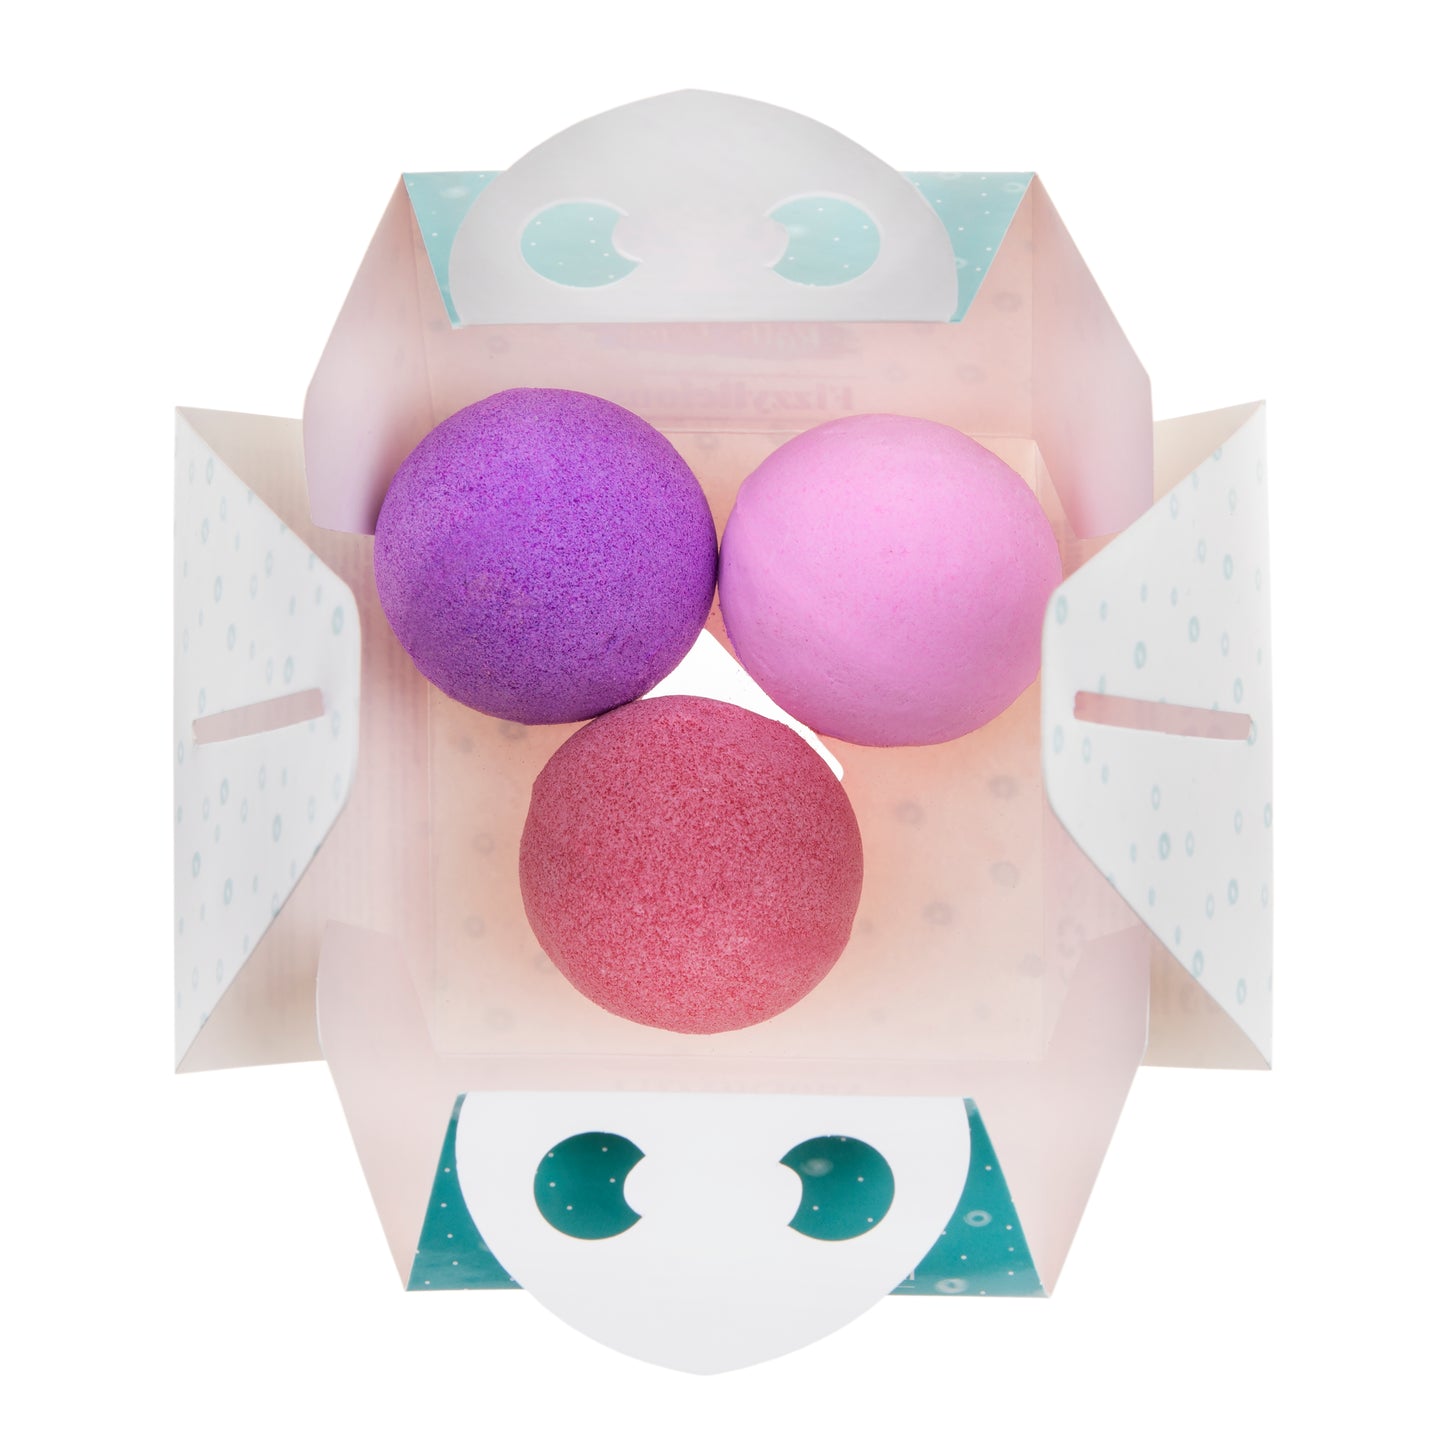 Miss Nella - Fizzylicious Pack of 3 Bath Bombs